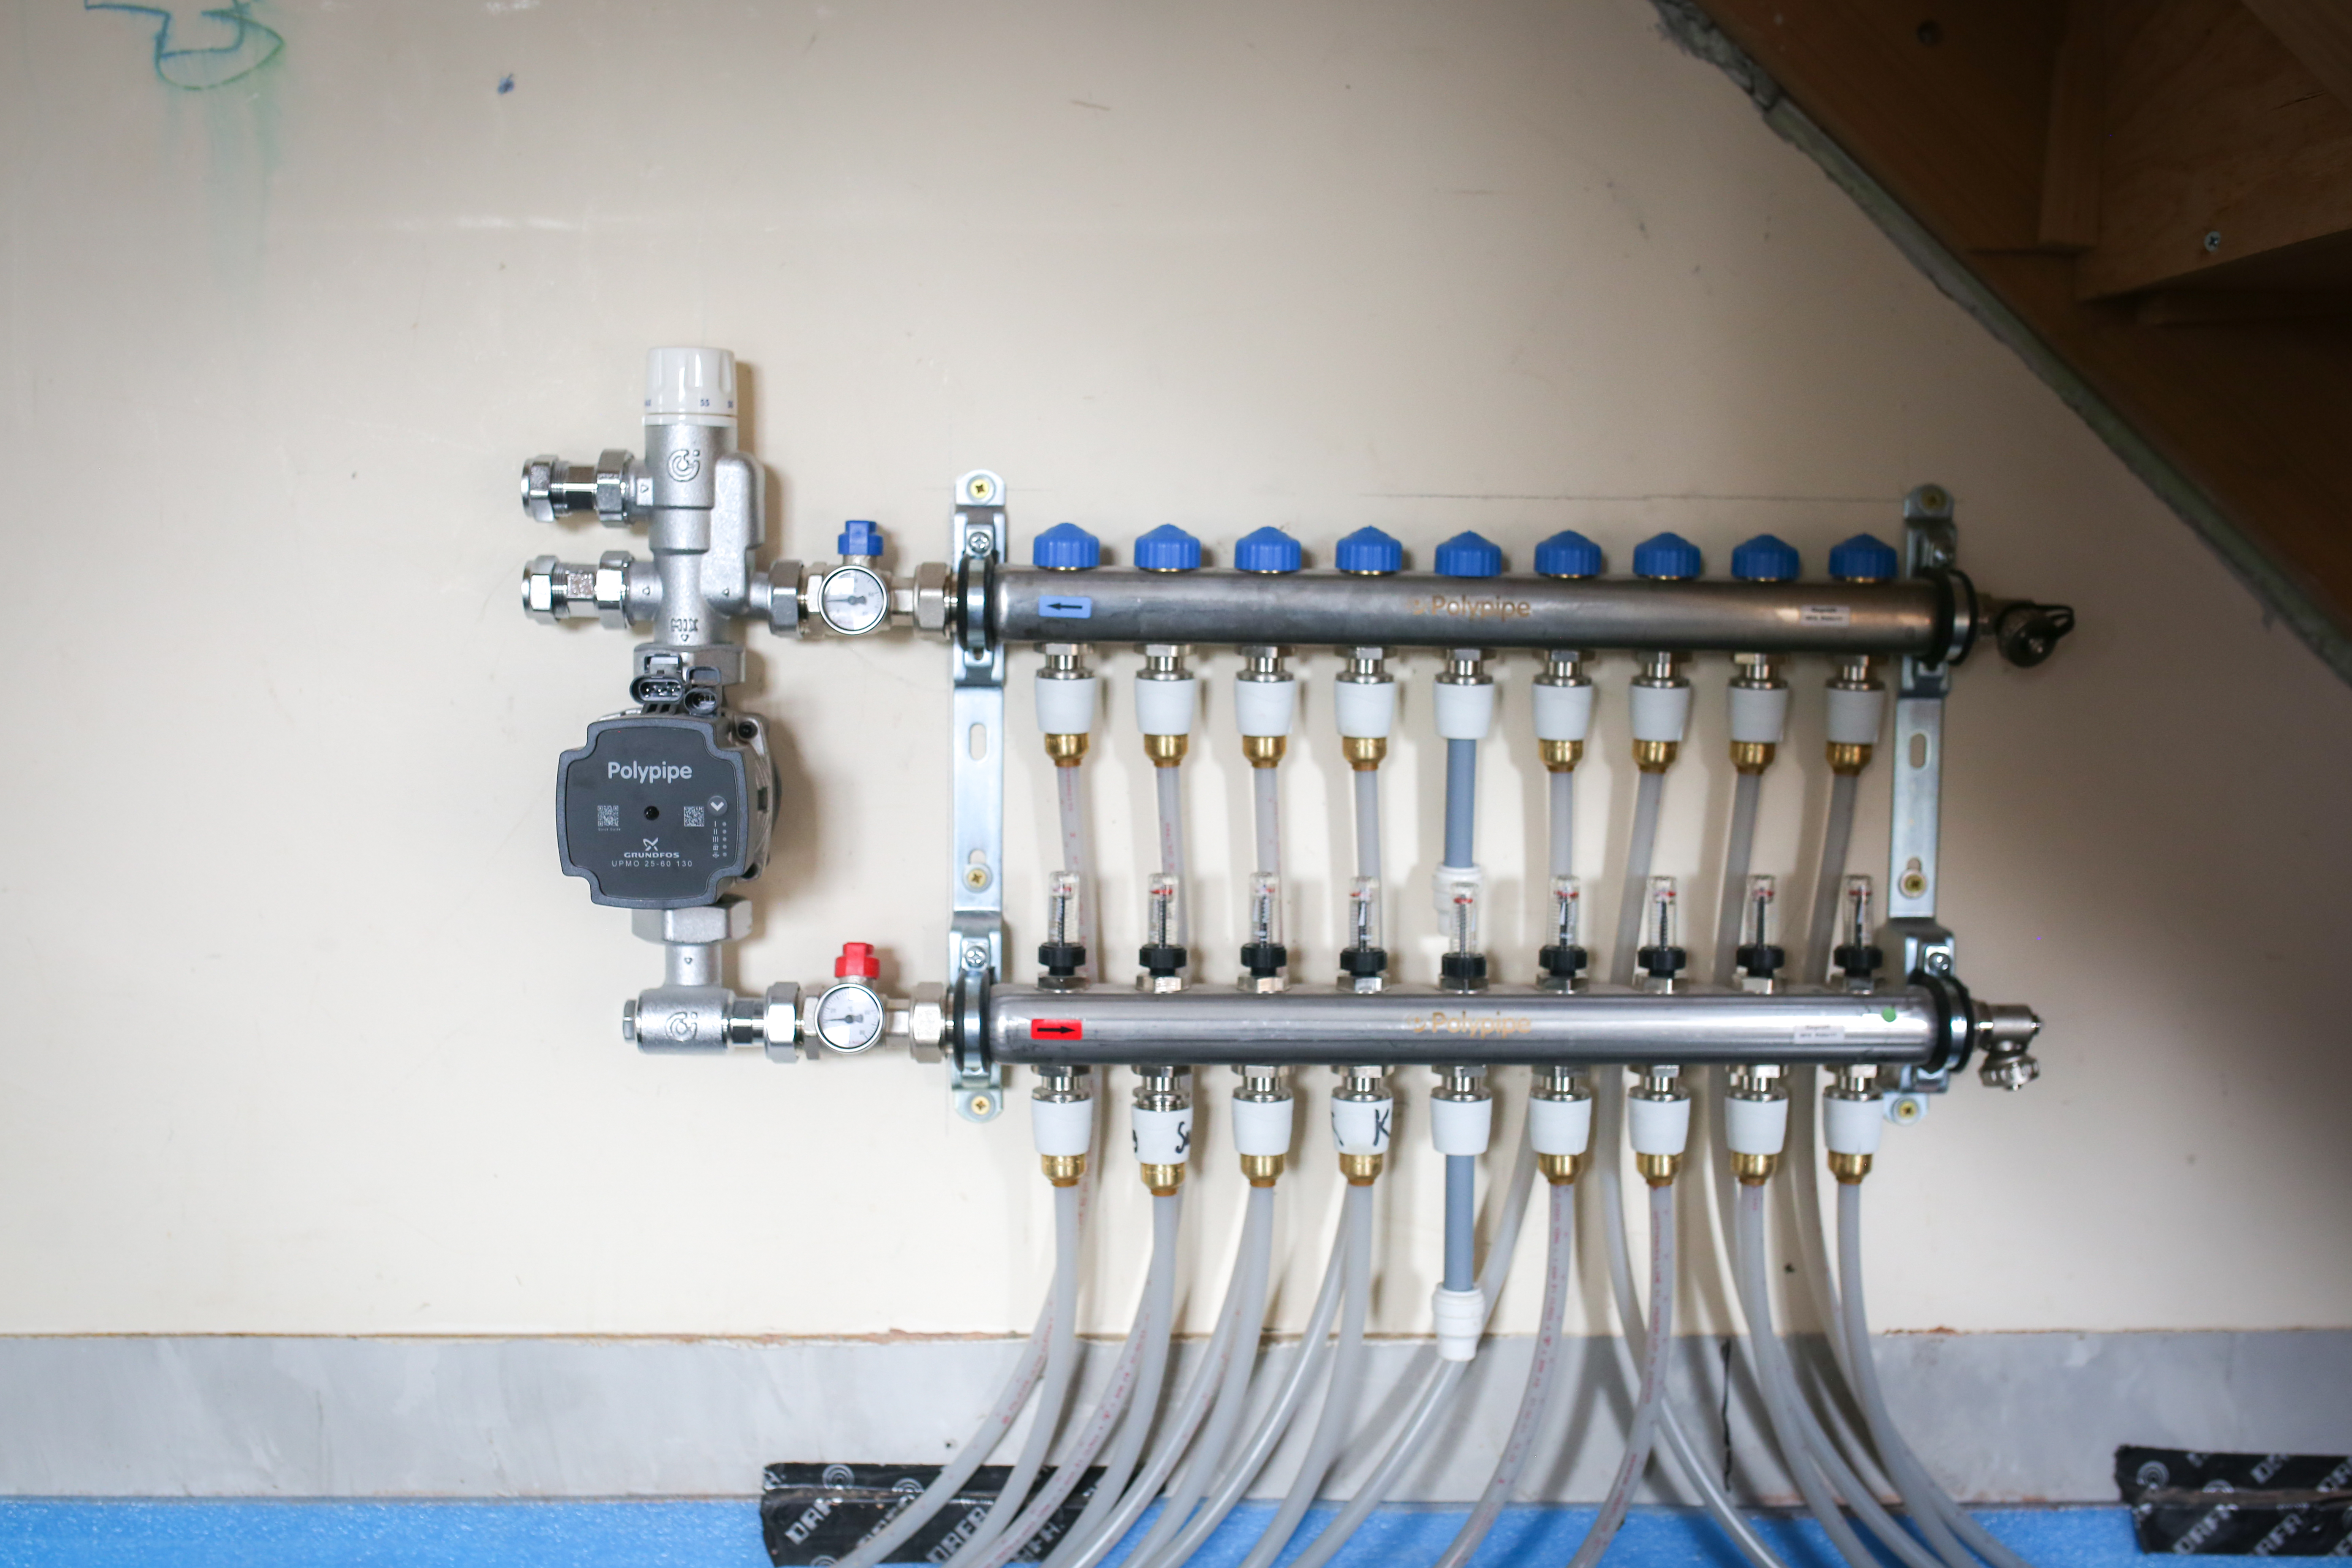 Polypipe's Auto-balancing Underfloor Heating Manifold mounted on a wall.